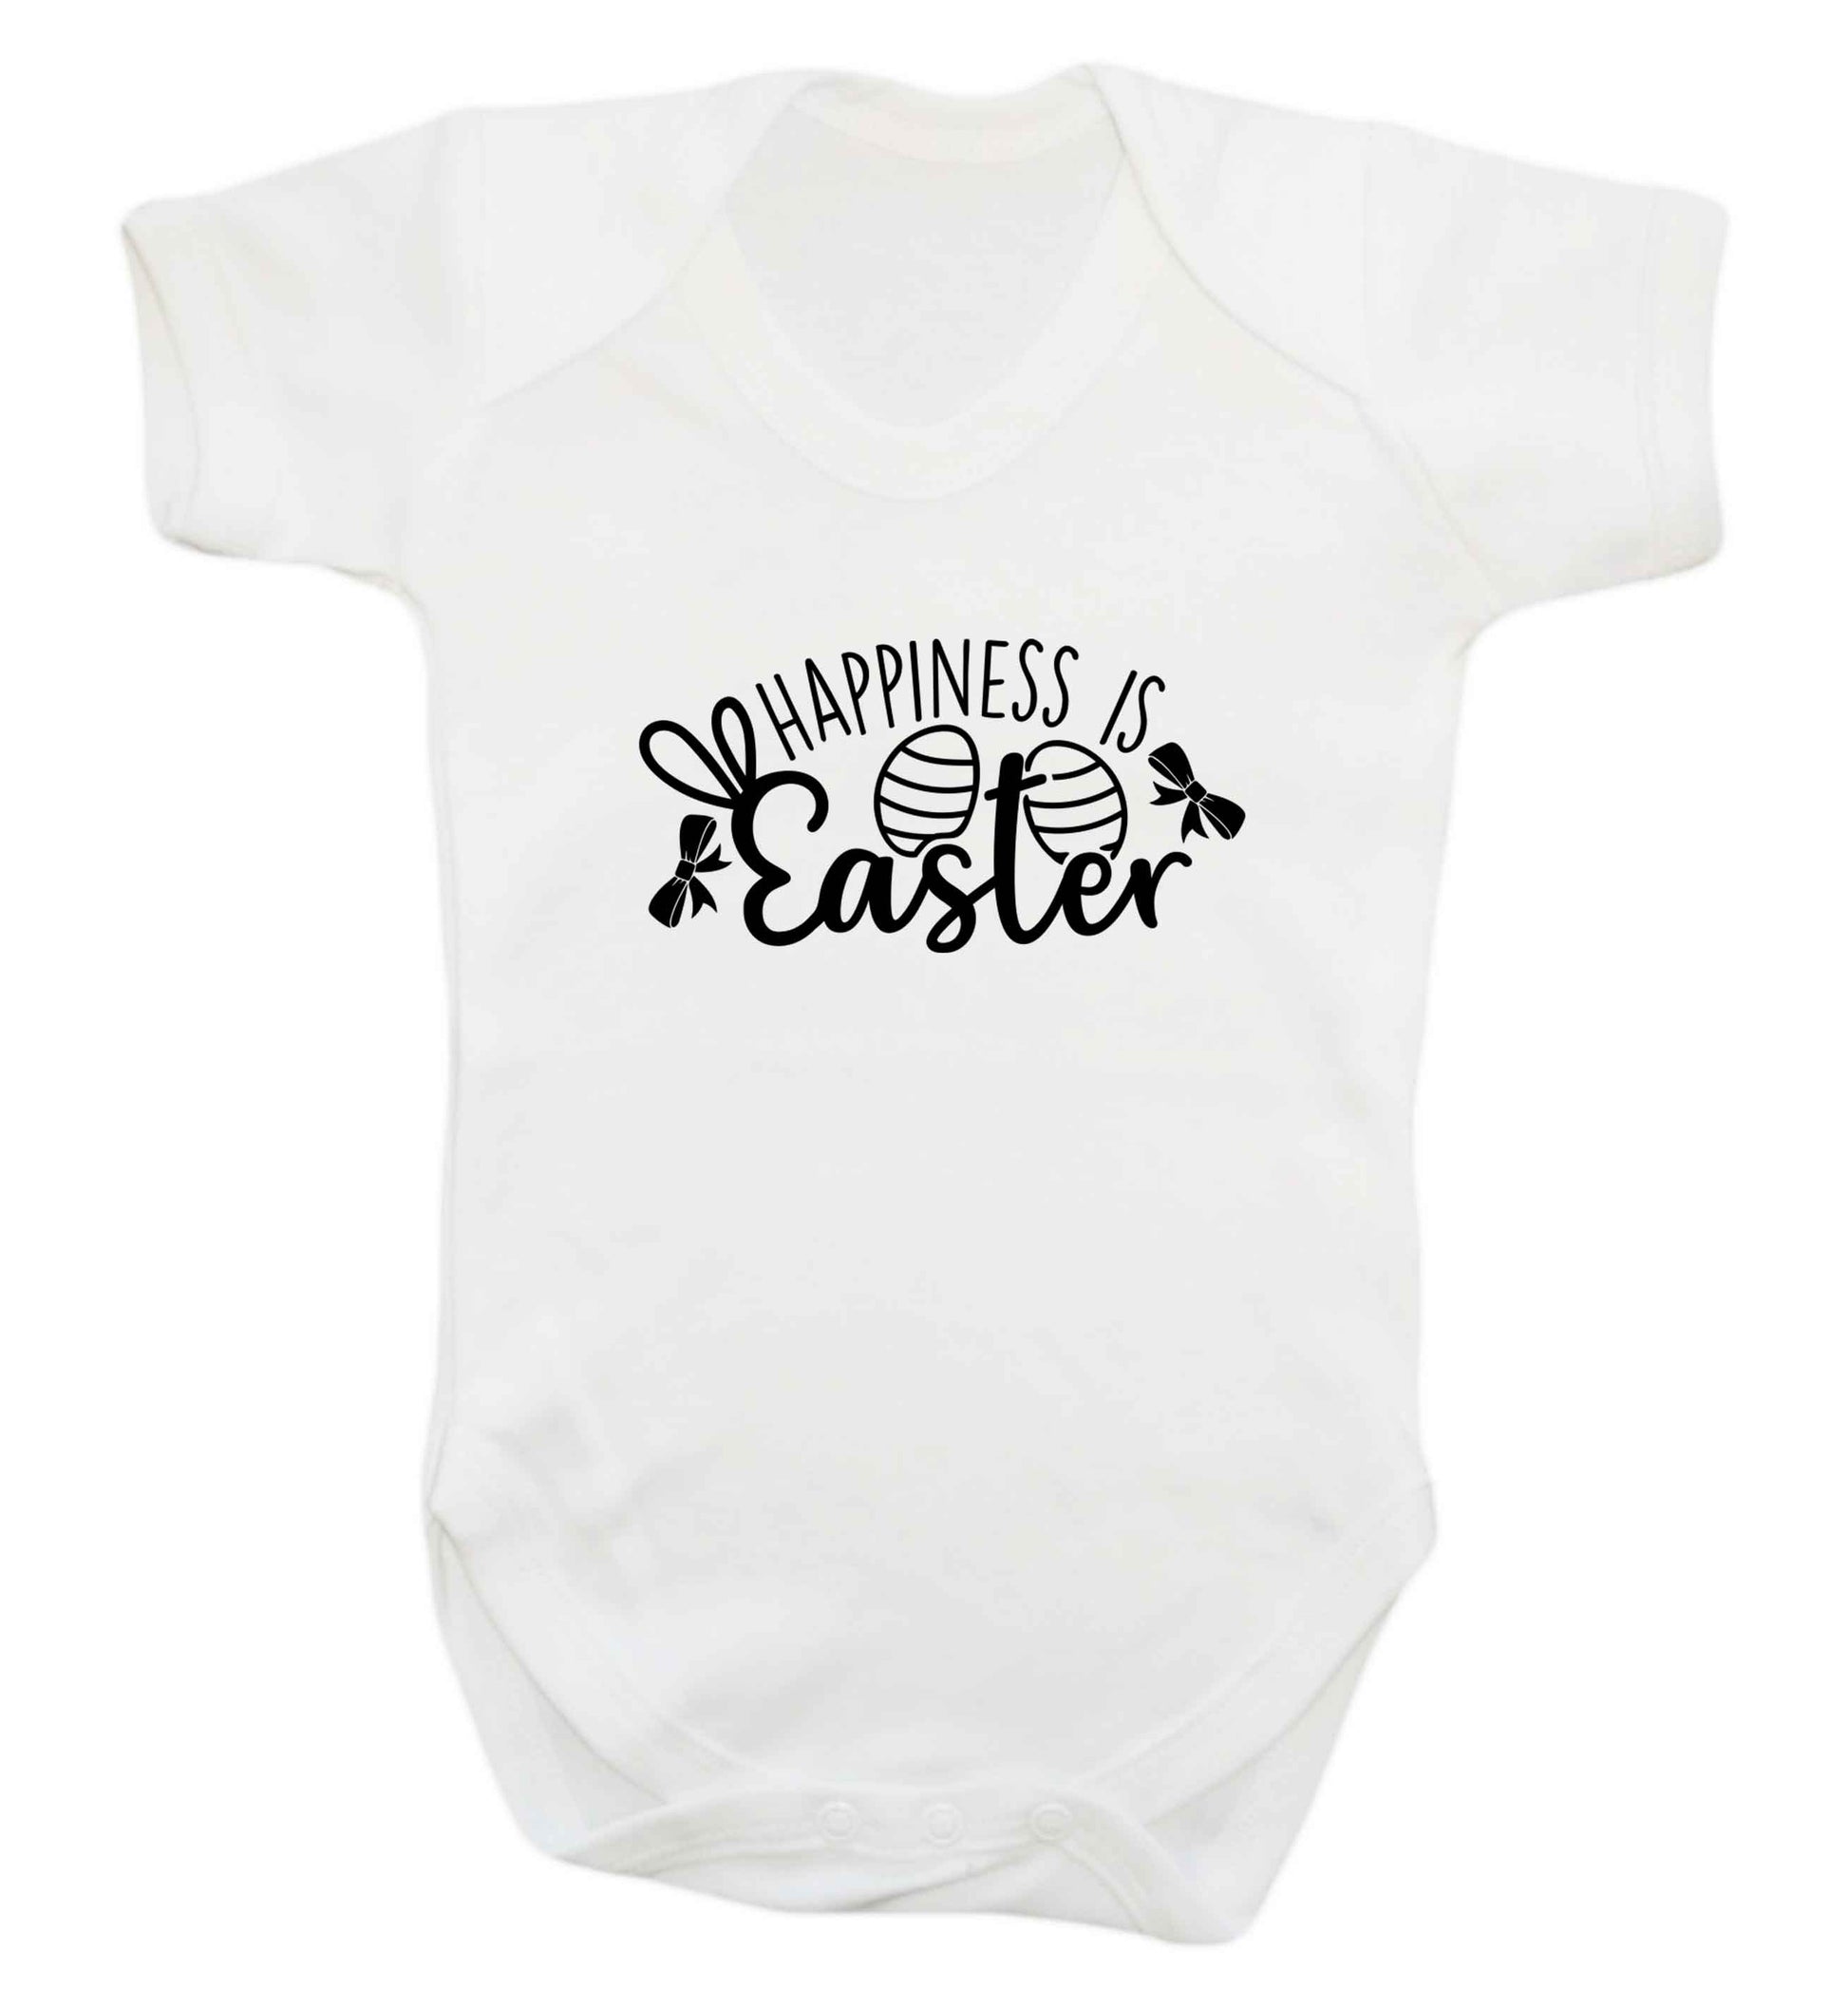 Happiness is easter baby vest white 18-24 months